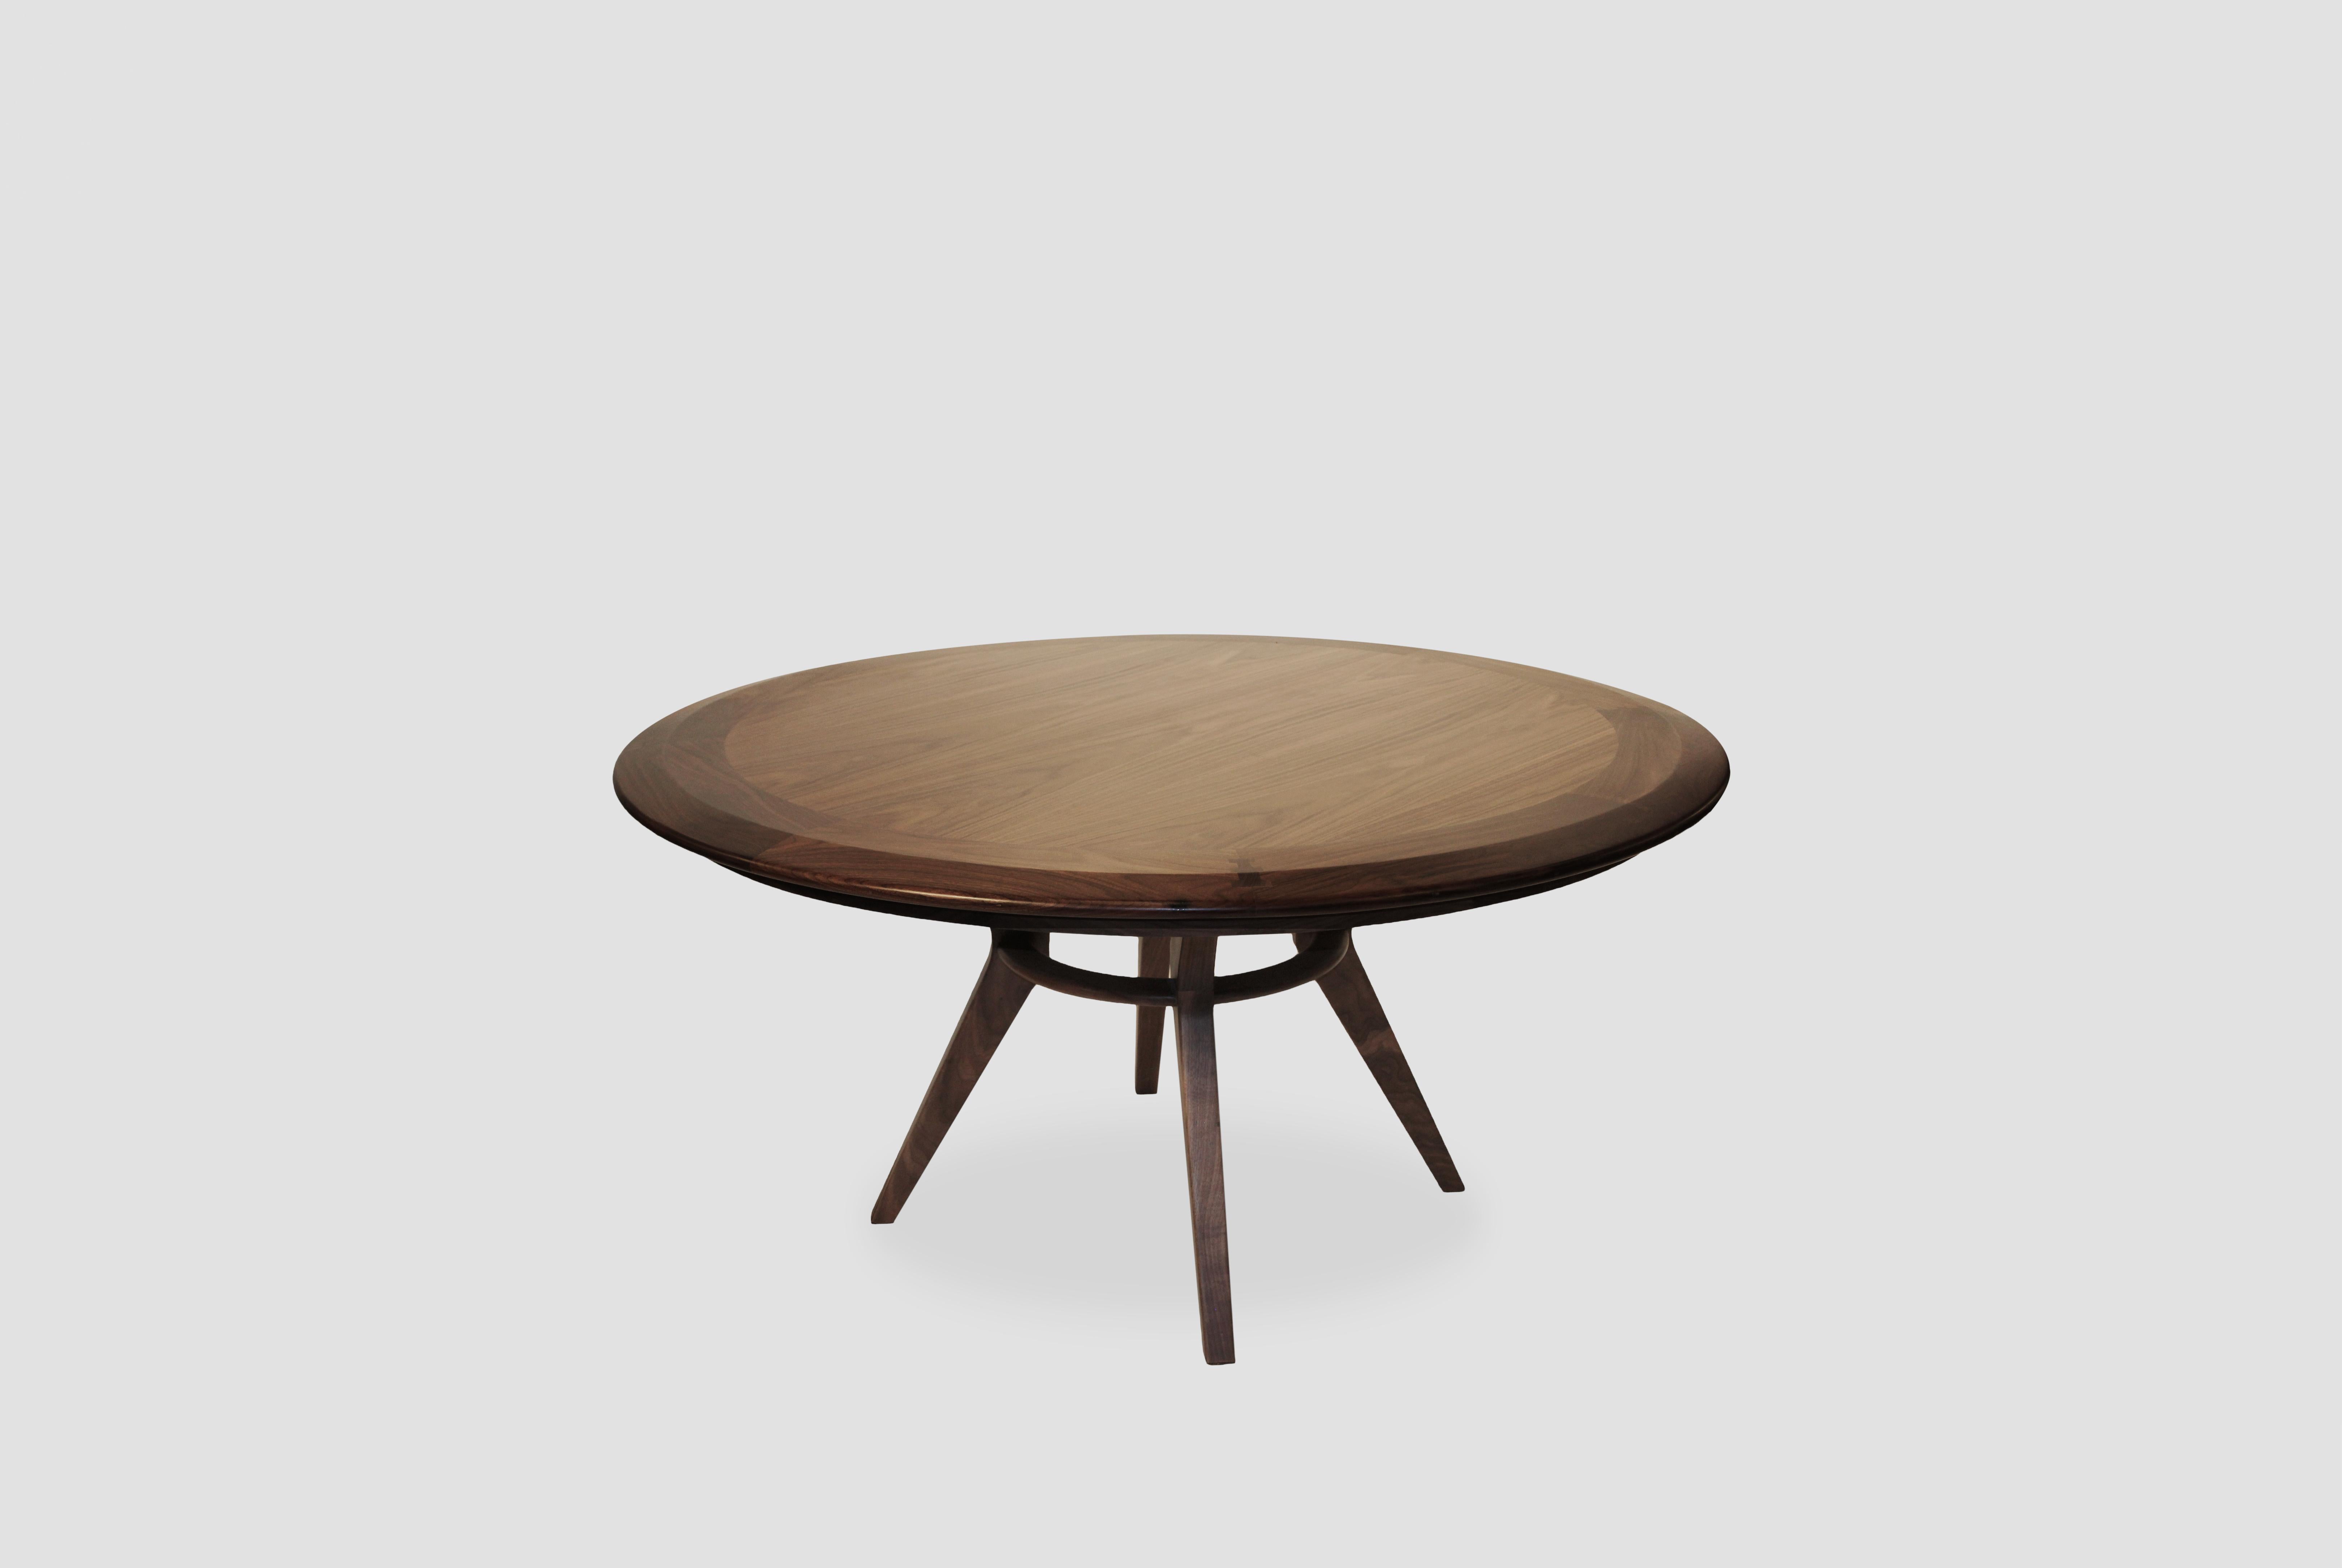 Round boomerang dining table by Arturo Verástegui
Dimensions: D 150 x H 75 cm
Materials: walnut wood.

Round dining table made of walnut.

Arturo Verástegui has been the director and founder of BREUER since 2015. Arturo began his career in the world